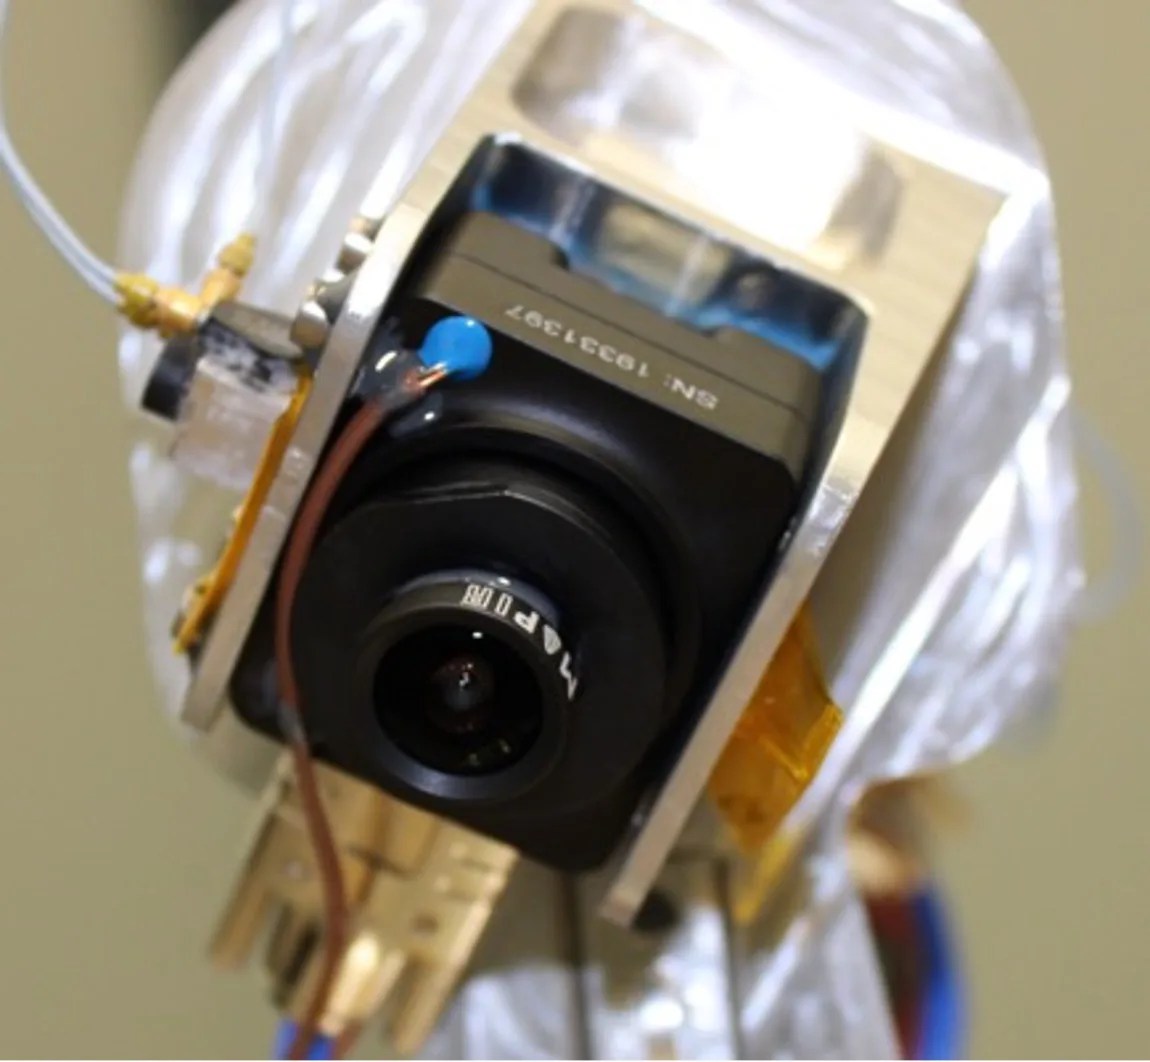 One of the SCALPSS cameras is attached securely to a metal receptacle. The section directly touching the camera is golden and the larger mount behind is silver. Wiring connects the camera to items outside the frame: a silver pair of wires is attached at the top and red wire is attached to the front with blue adhesive.